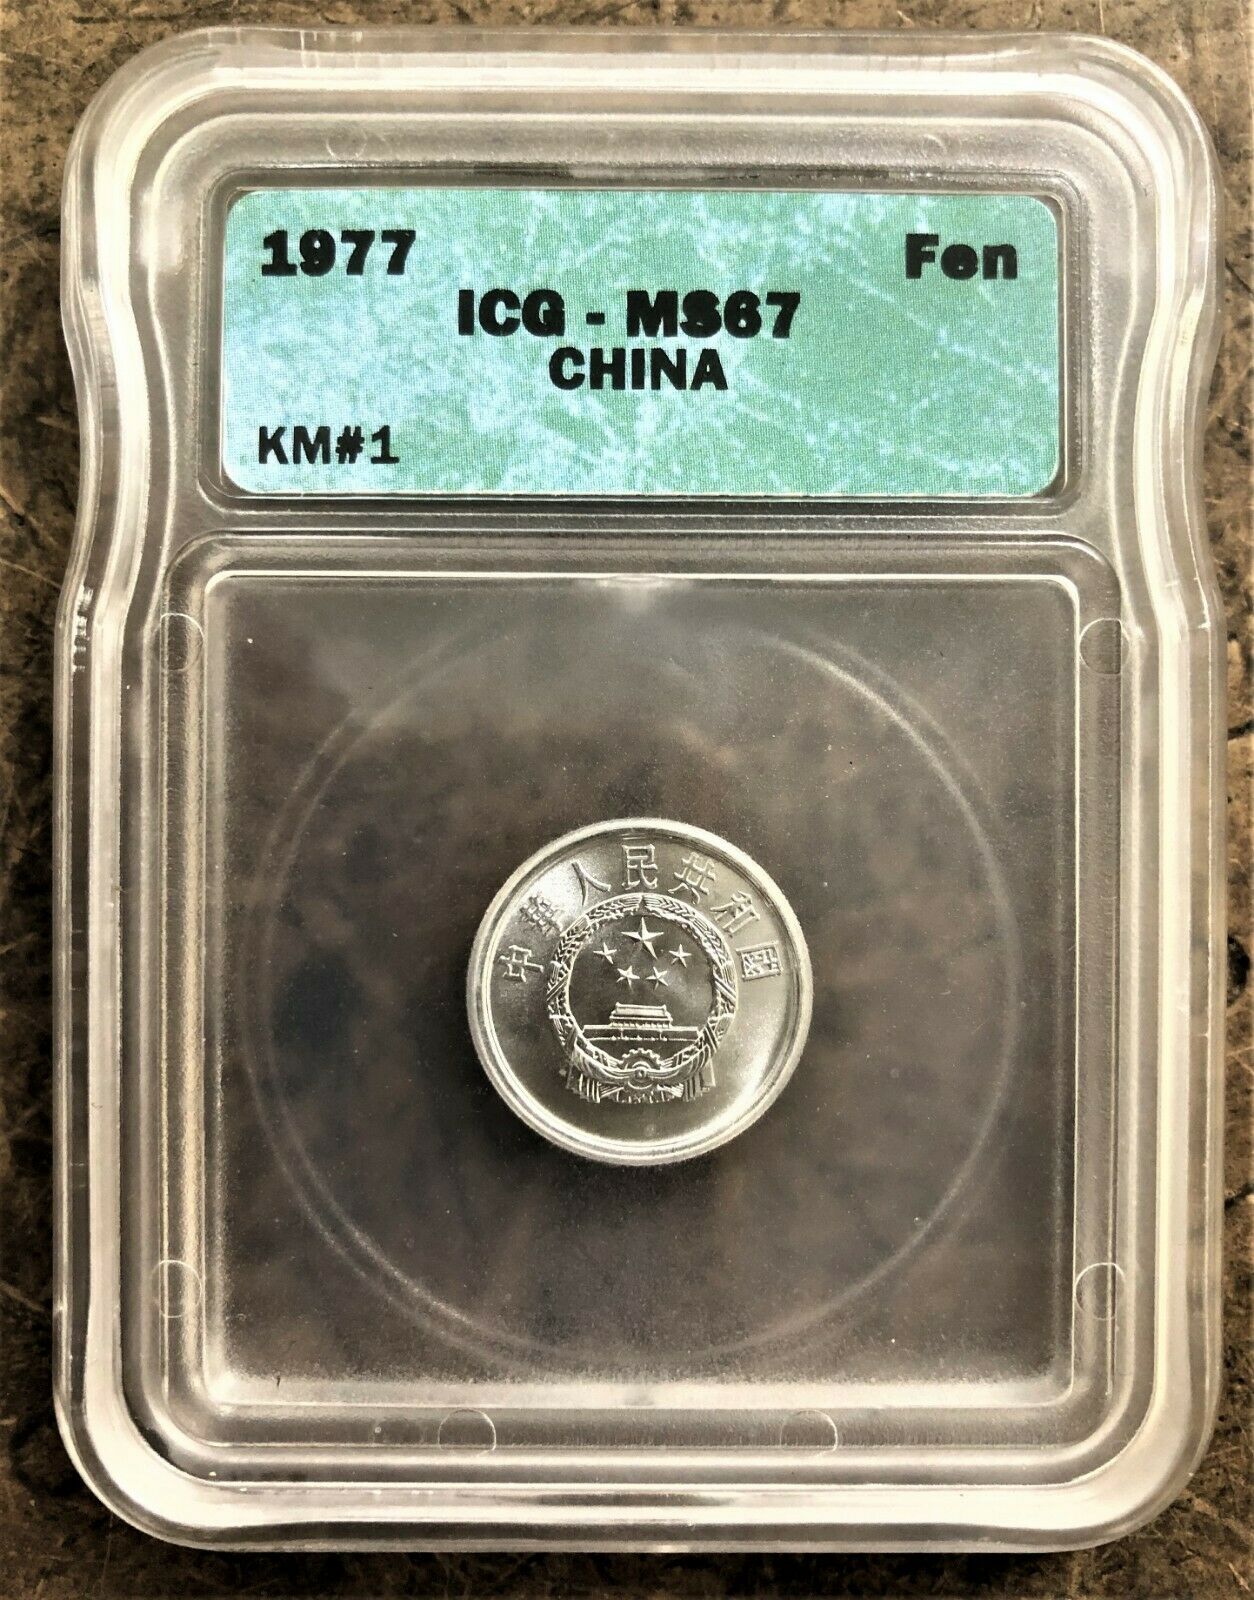 CHINA MINT STATE SLAB (MS) 67 (HIGHEST GRADE EVER?) ONE FEN COIN of 1977 KM # 1